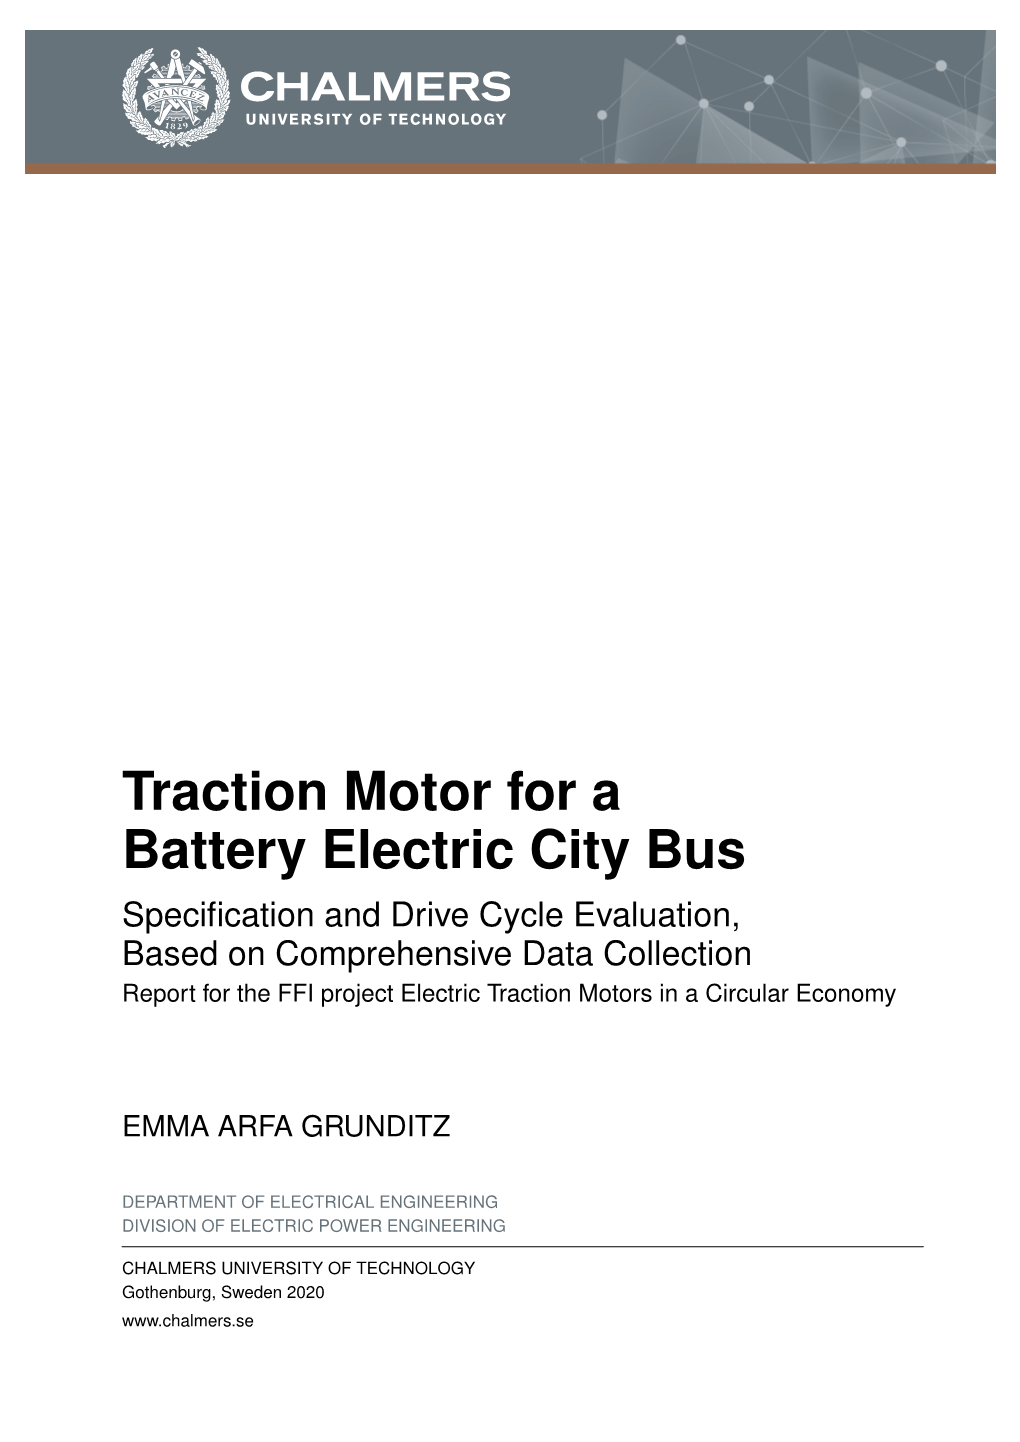 Traction Motor for a Battery Electric City